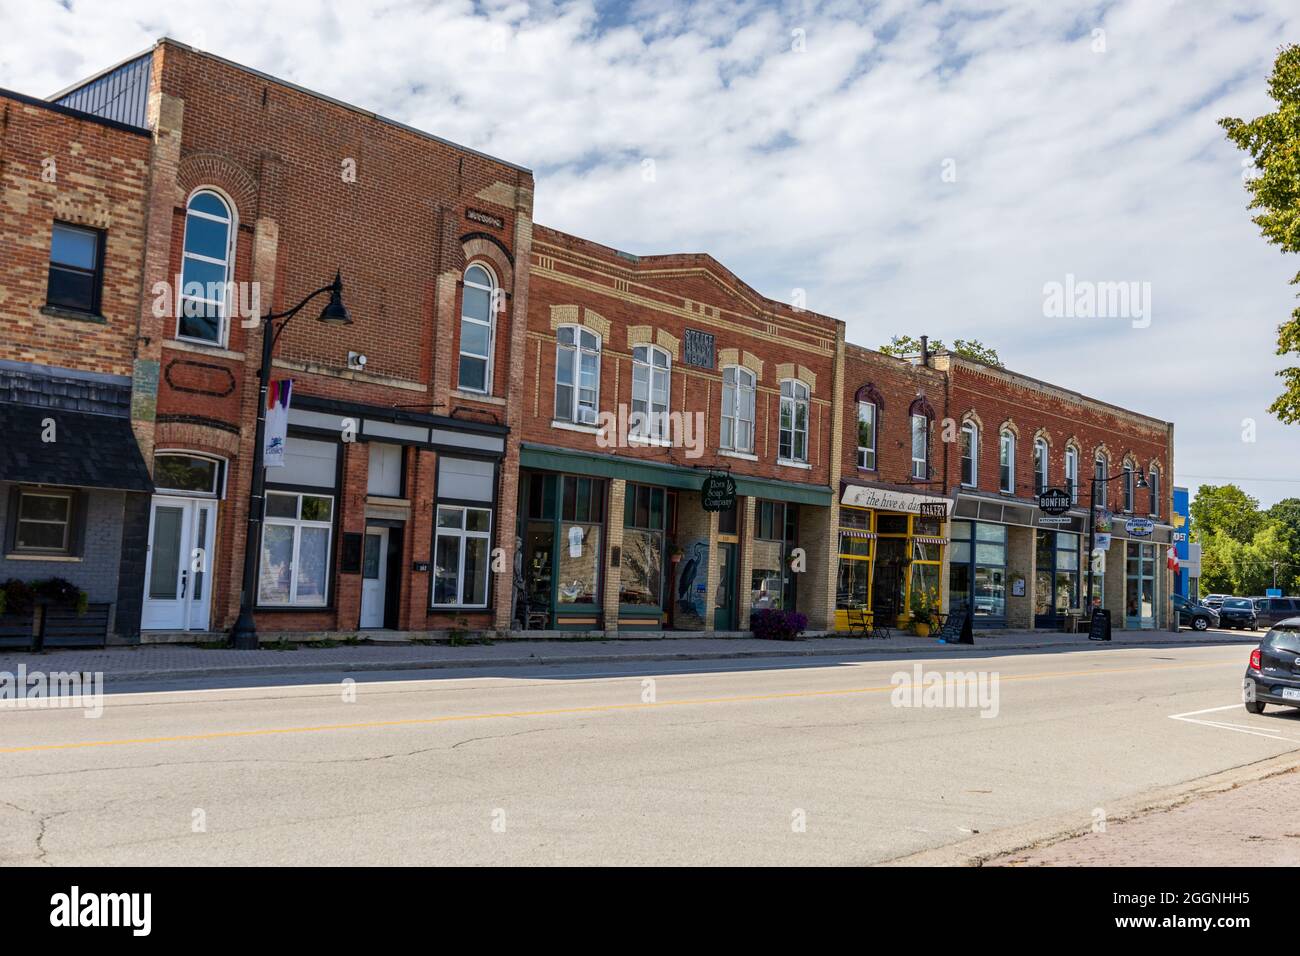 Historic Heritage Buildings The Steele Block Paisley Ontario Canada With Small Business Retail Shops Stores And Cafe Paisley Ontario Canada Stock Photo